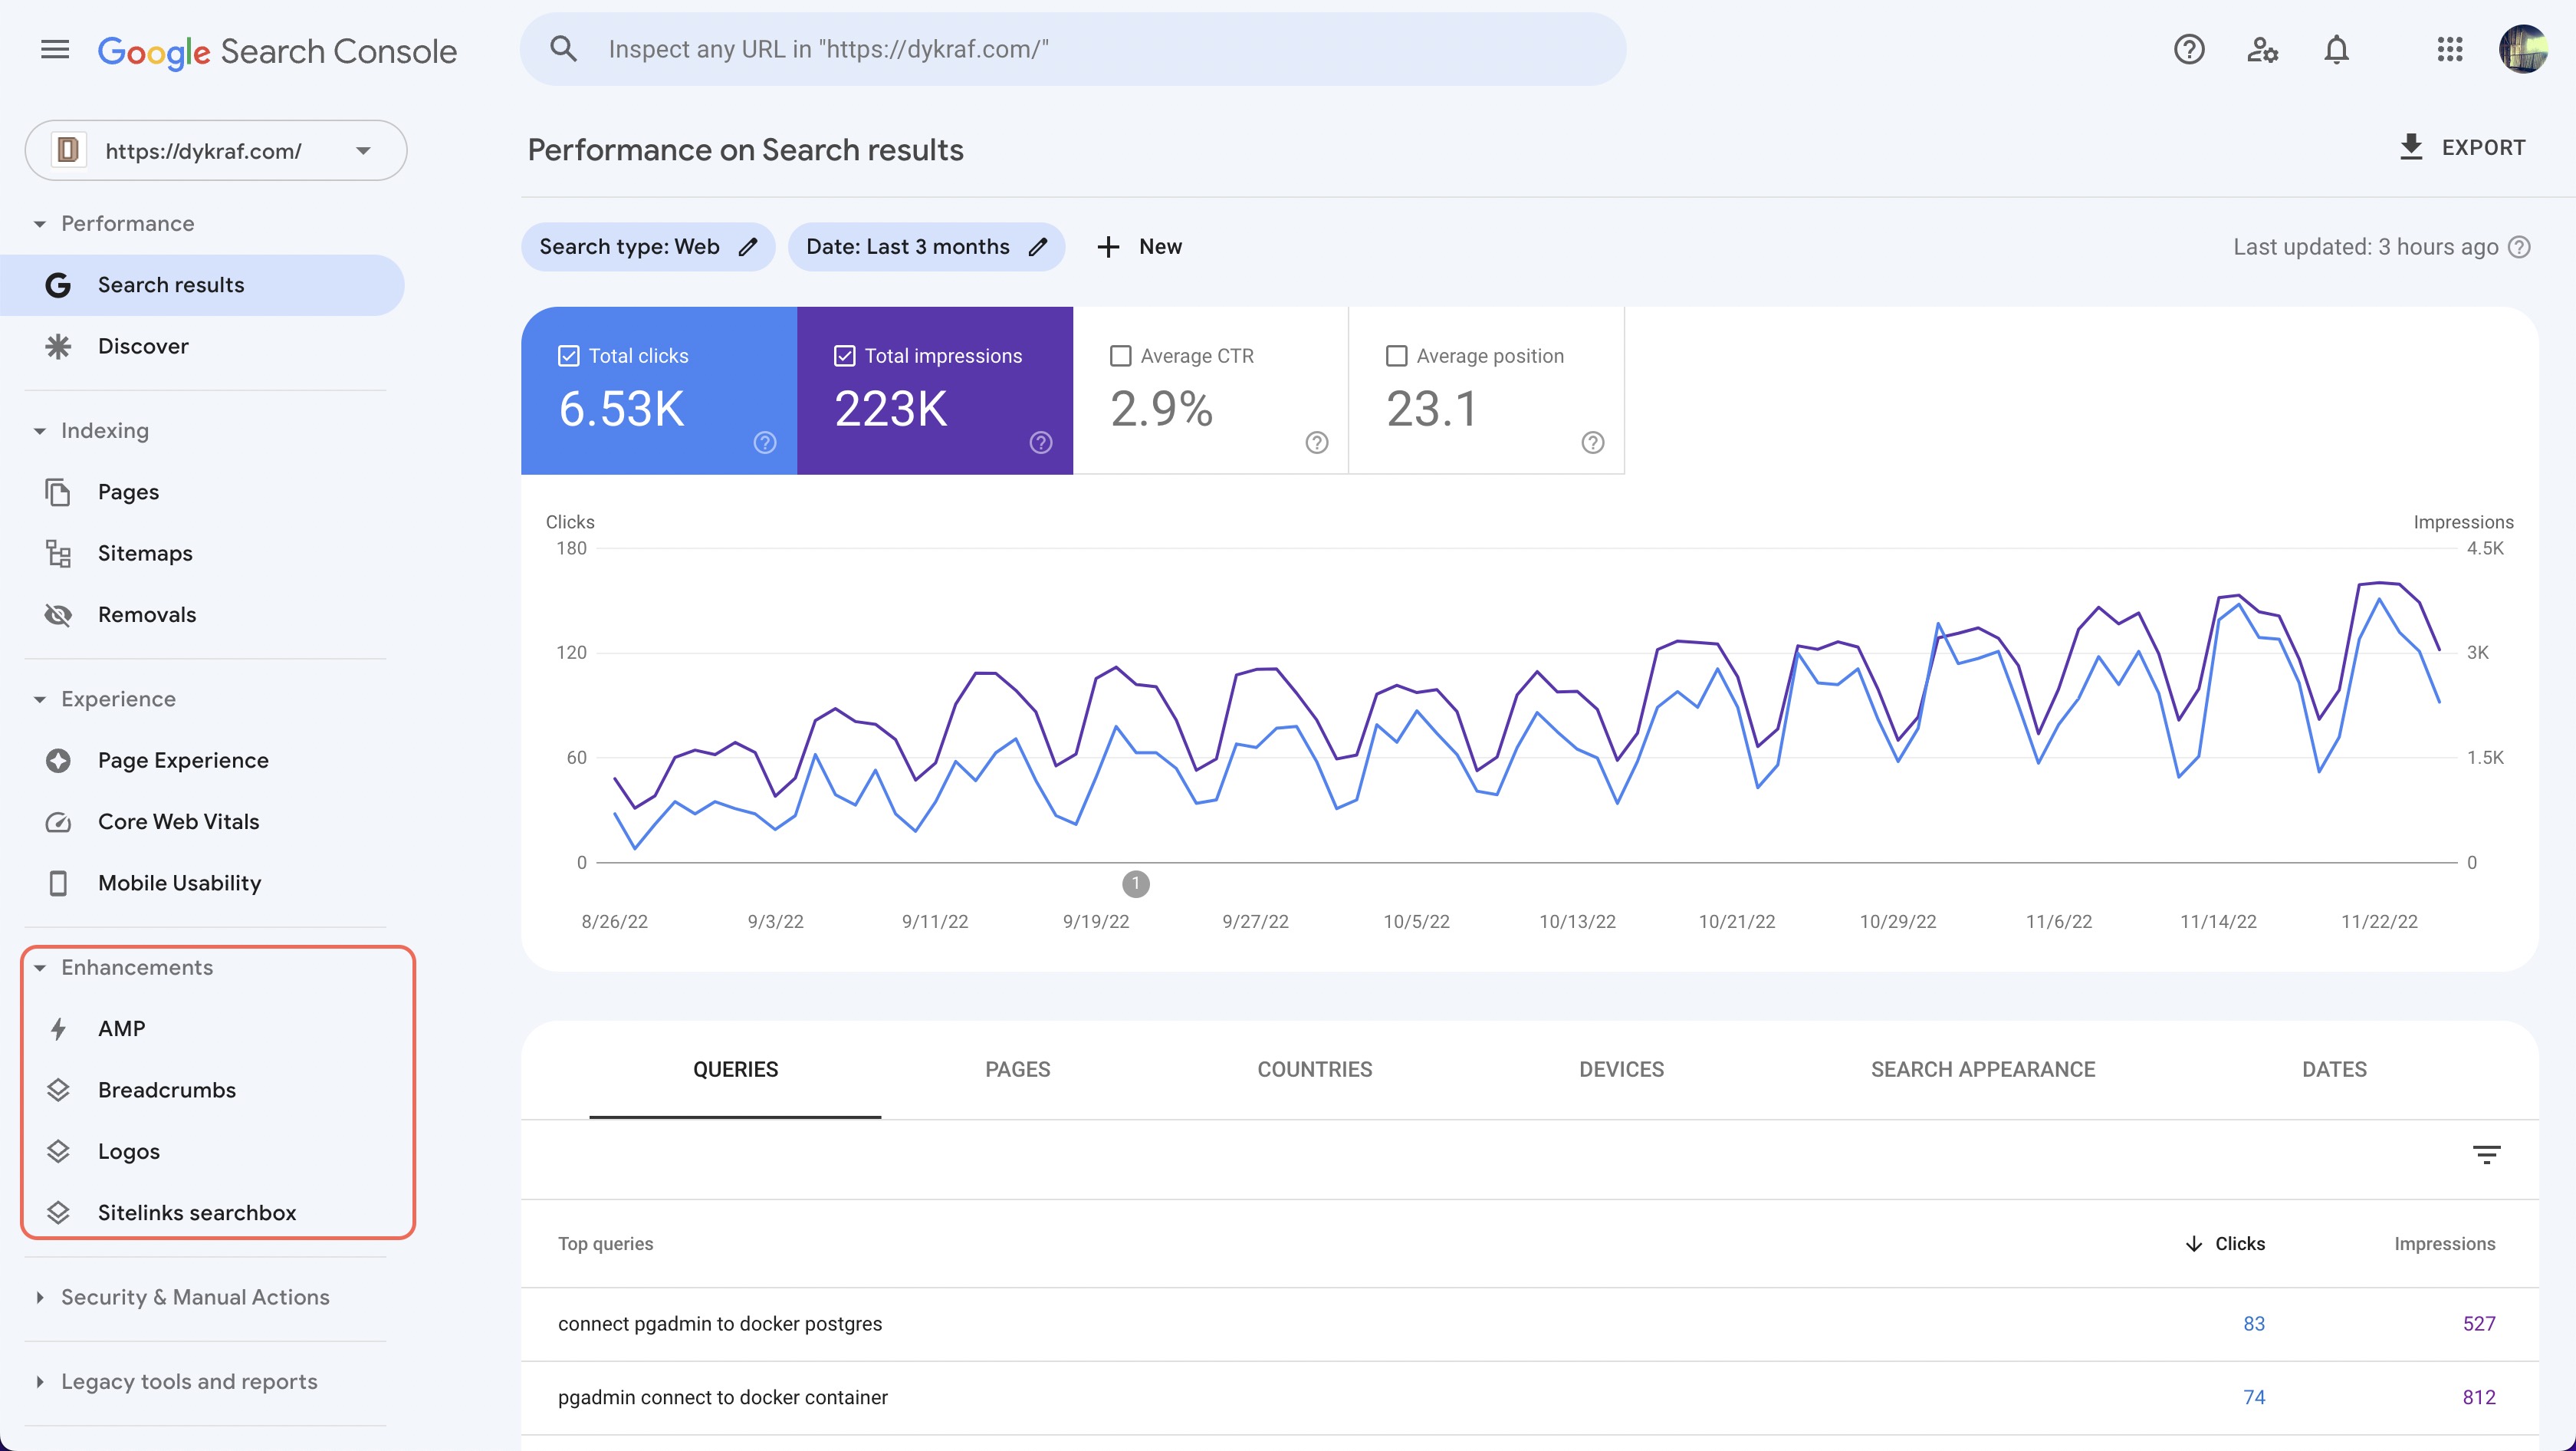 Enhanchement Analytic in Google Search Console